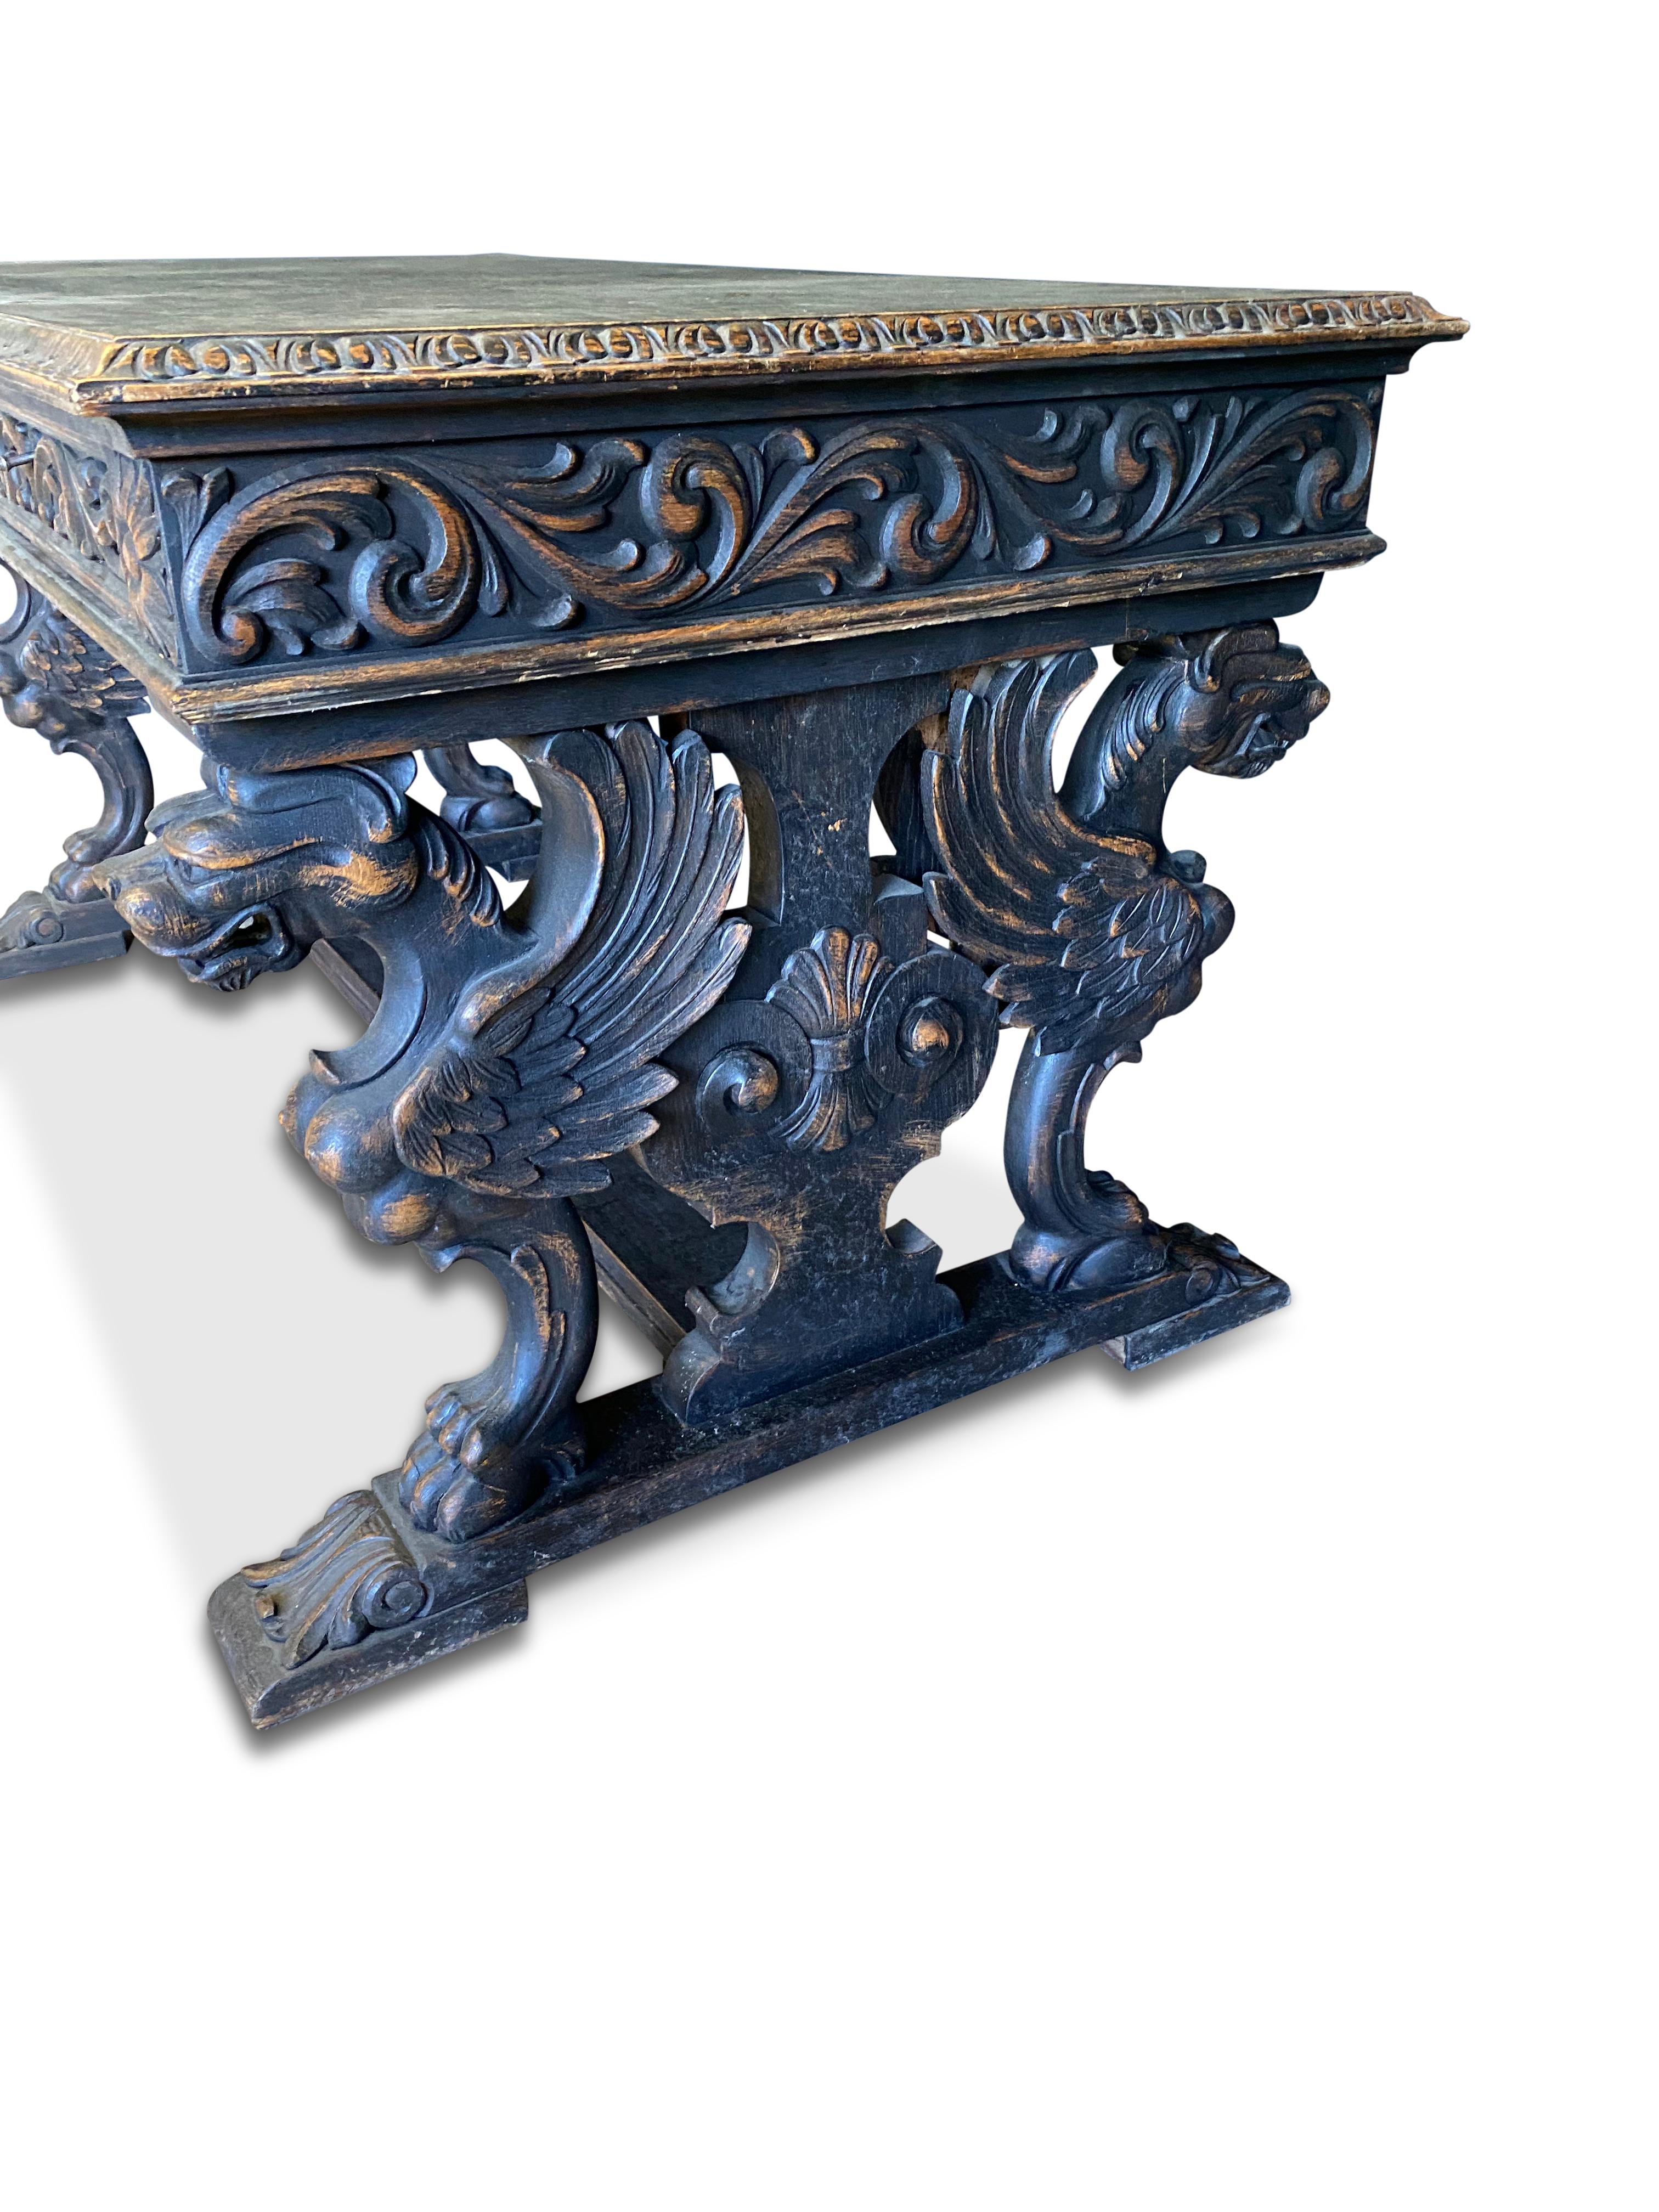 Stunning Swedish 20th Century carved oak Desk or Table.This piece features a rectangular top with a moulded and intricately carved edge. The top rests on a substantial frieze, carved in the round with elegant foliate decoration and rosettes to each